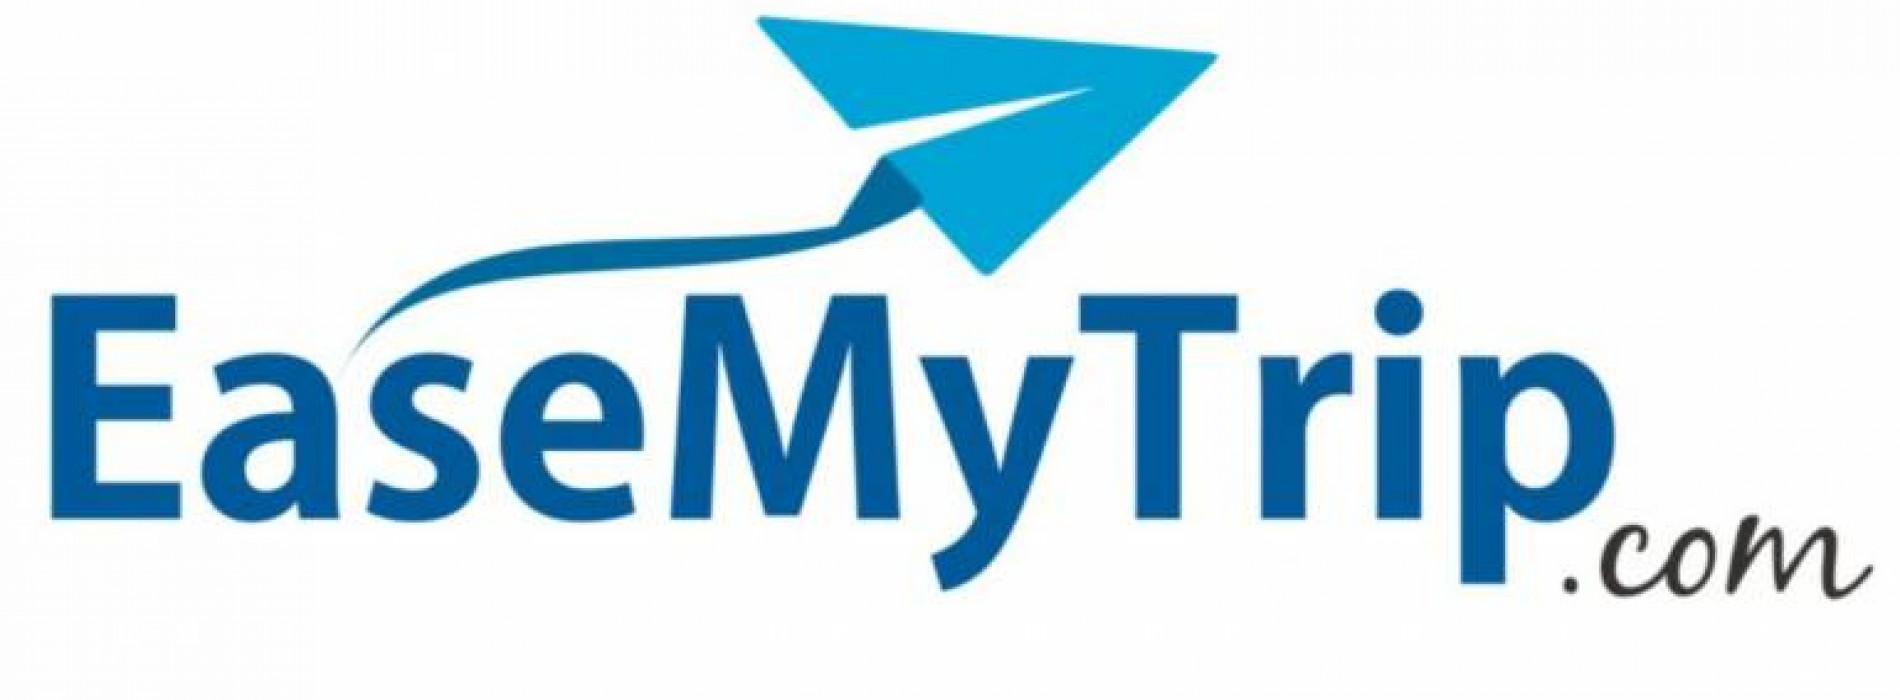 EaseMyTrip ties up with over 450 NRIs across all major cities of the world